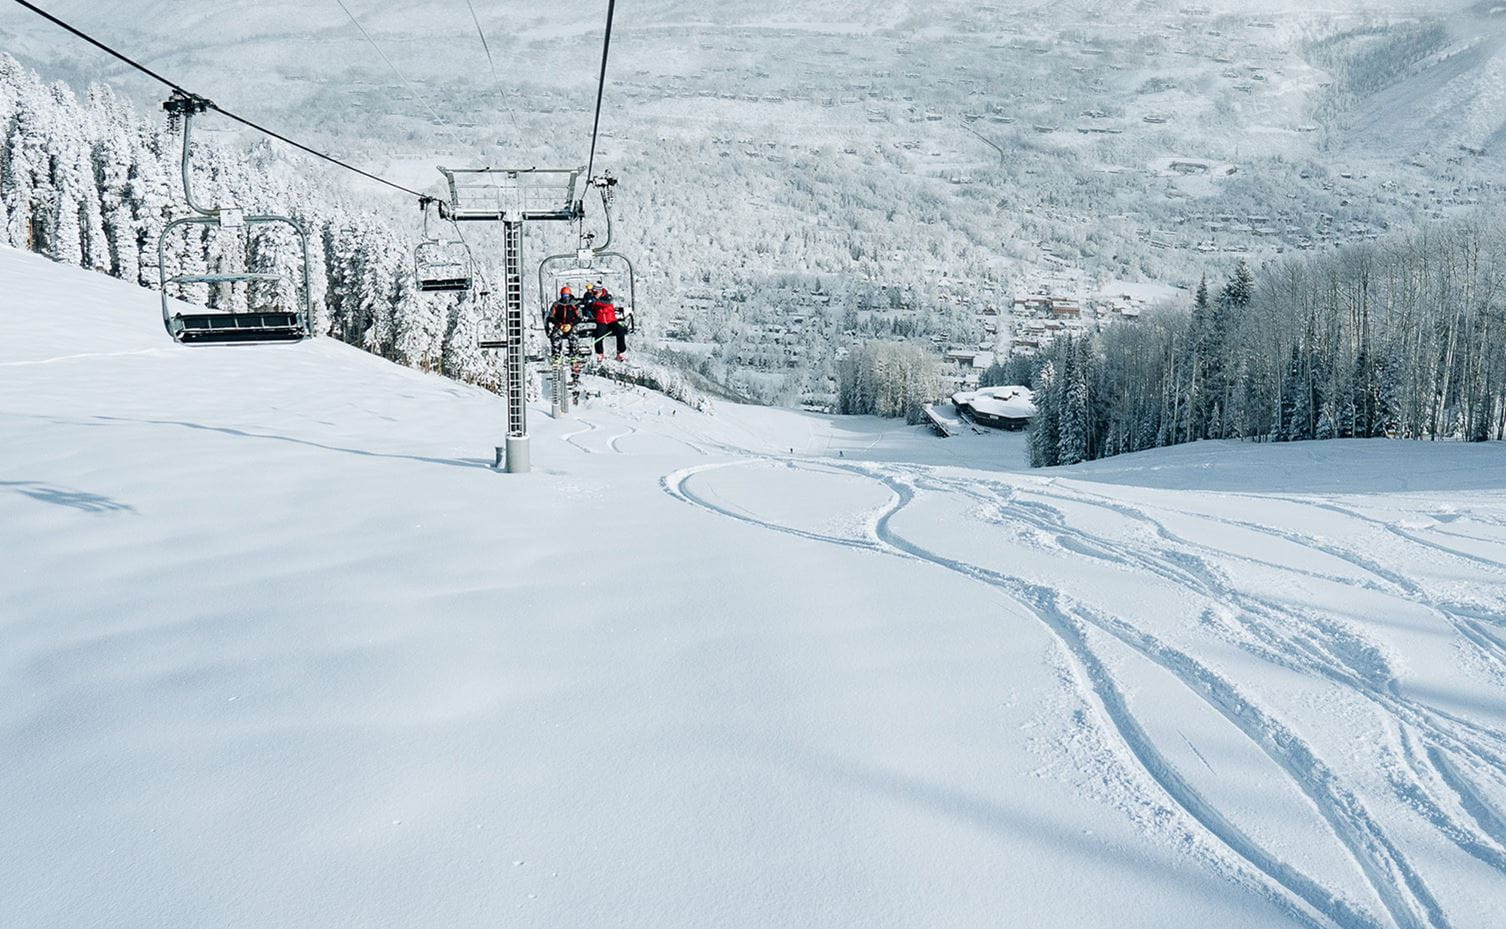 Skiers ride up a lift at Aspen Snowmass on a deep powder day